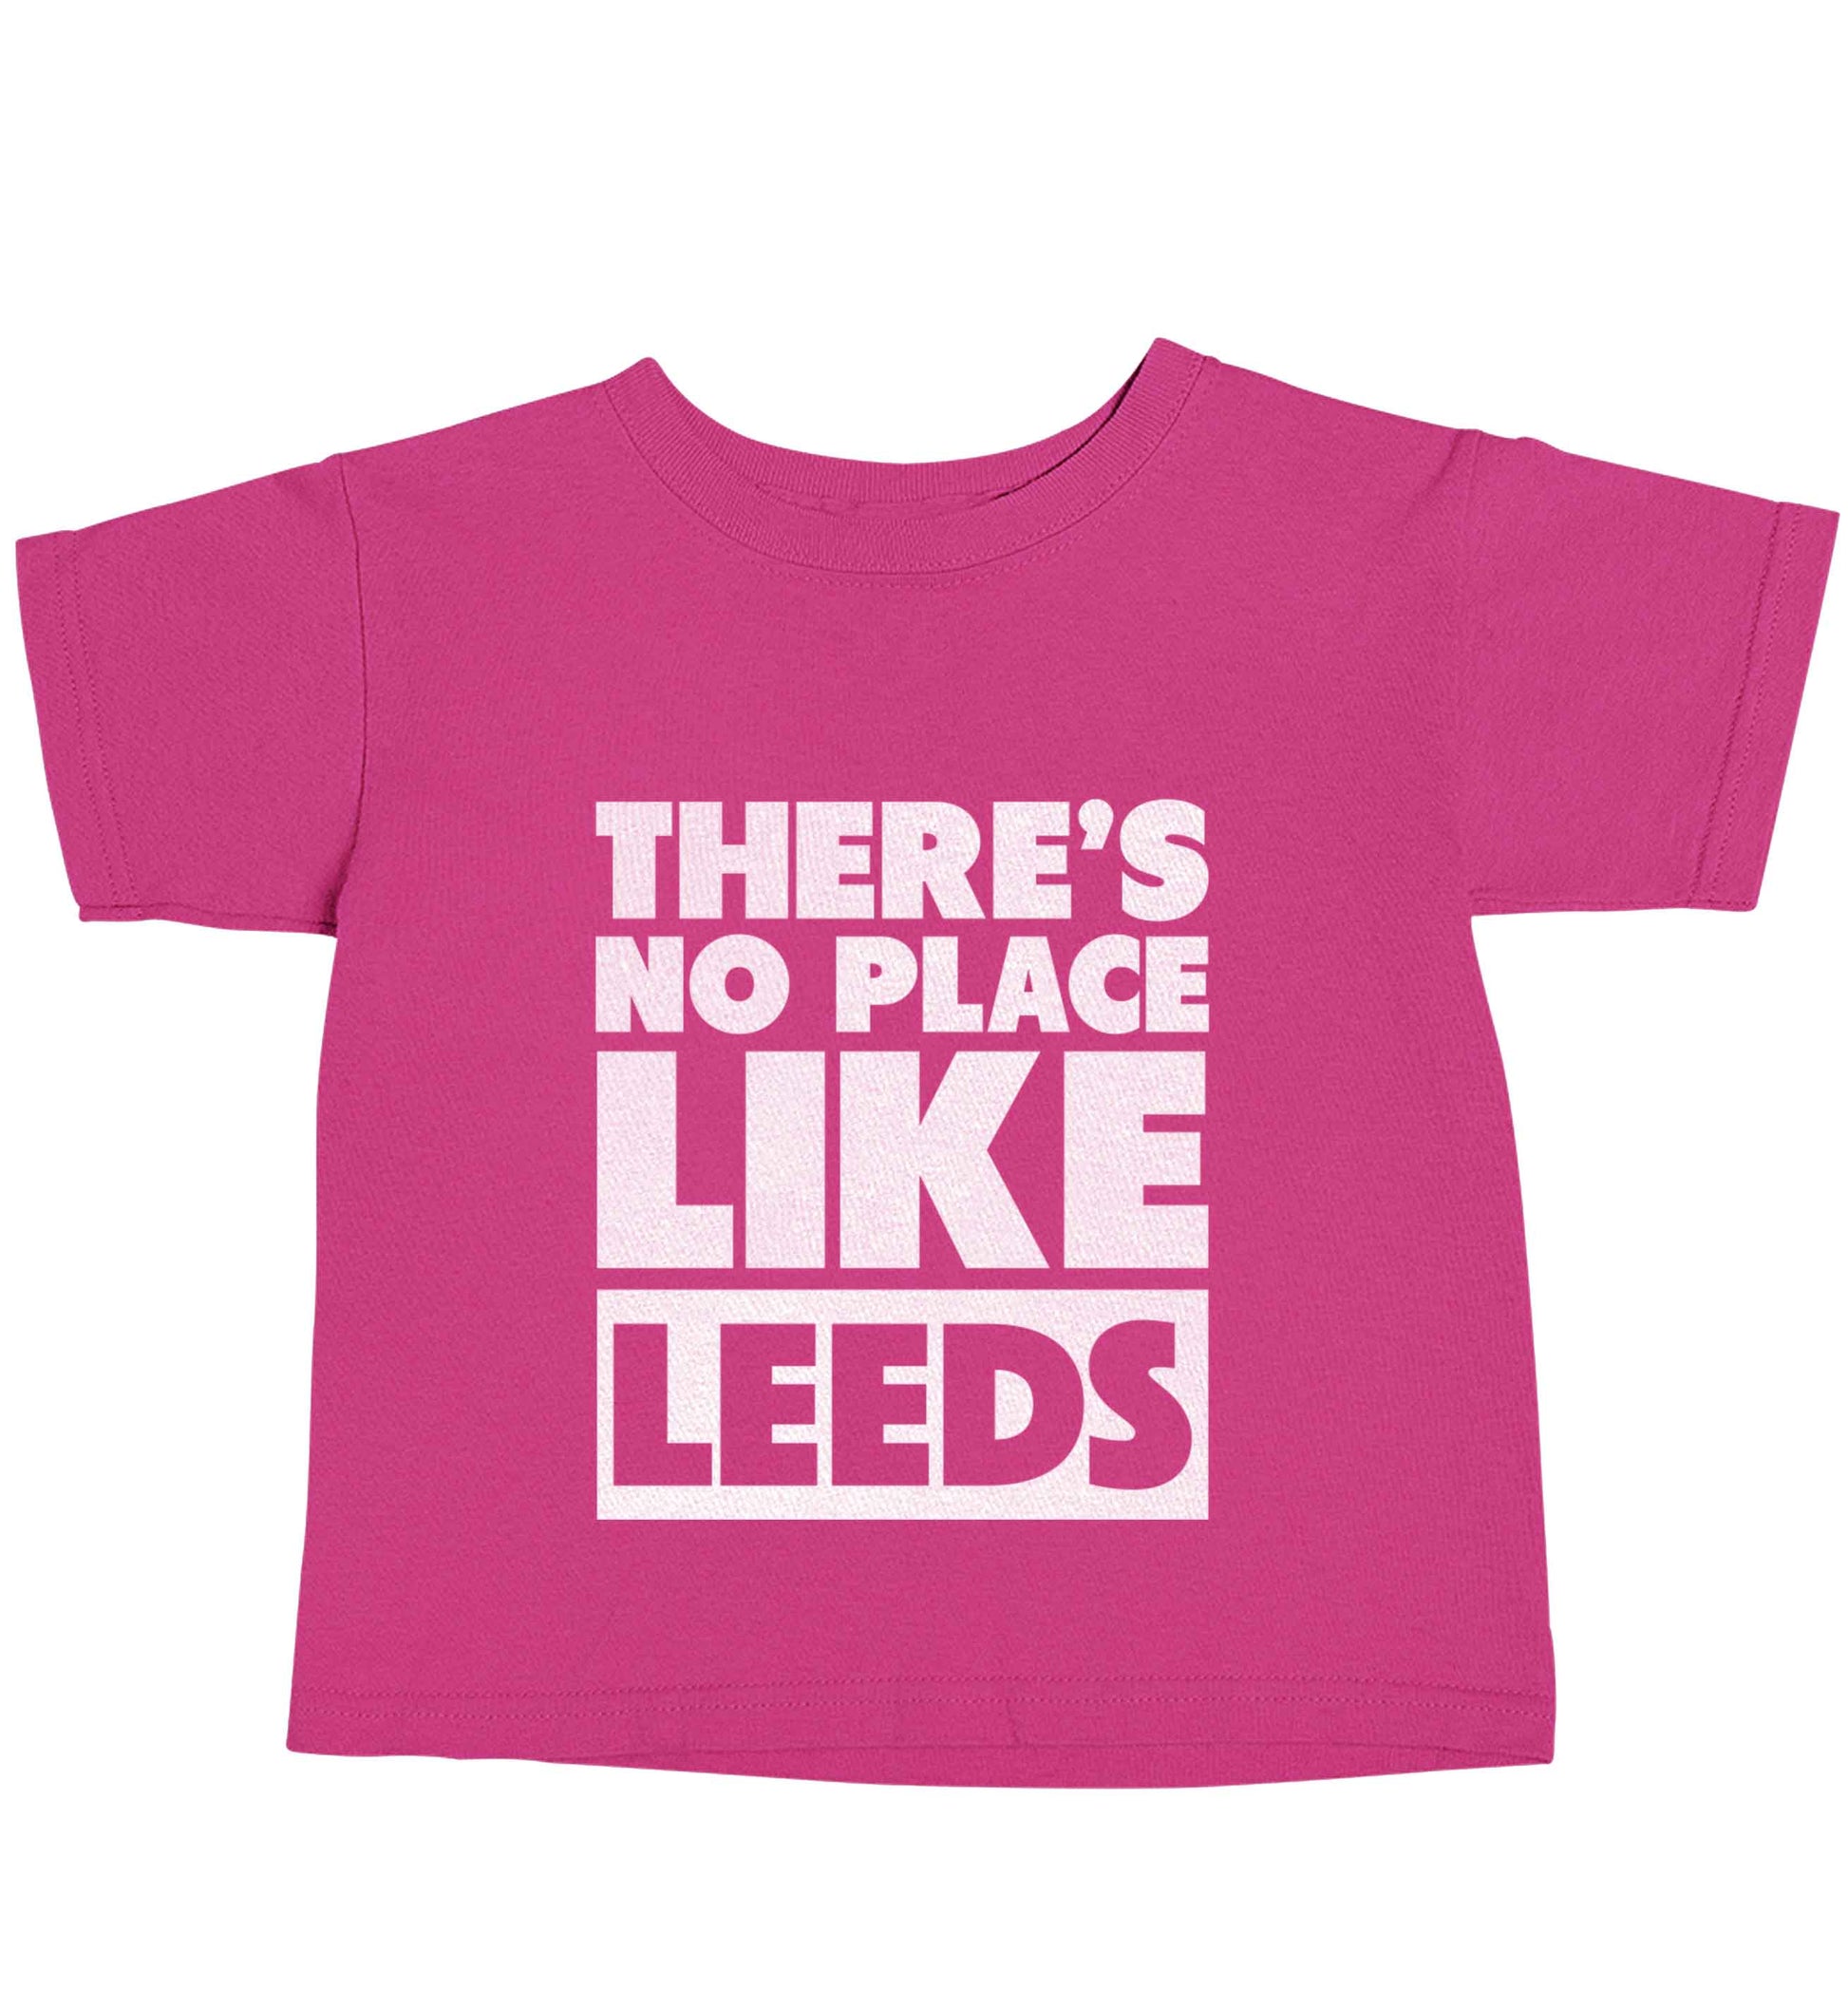 There's no place like Leeds pink baby toddler Tshirt 2 Years